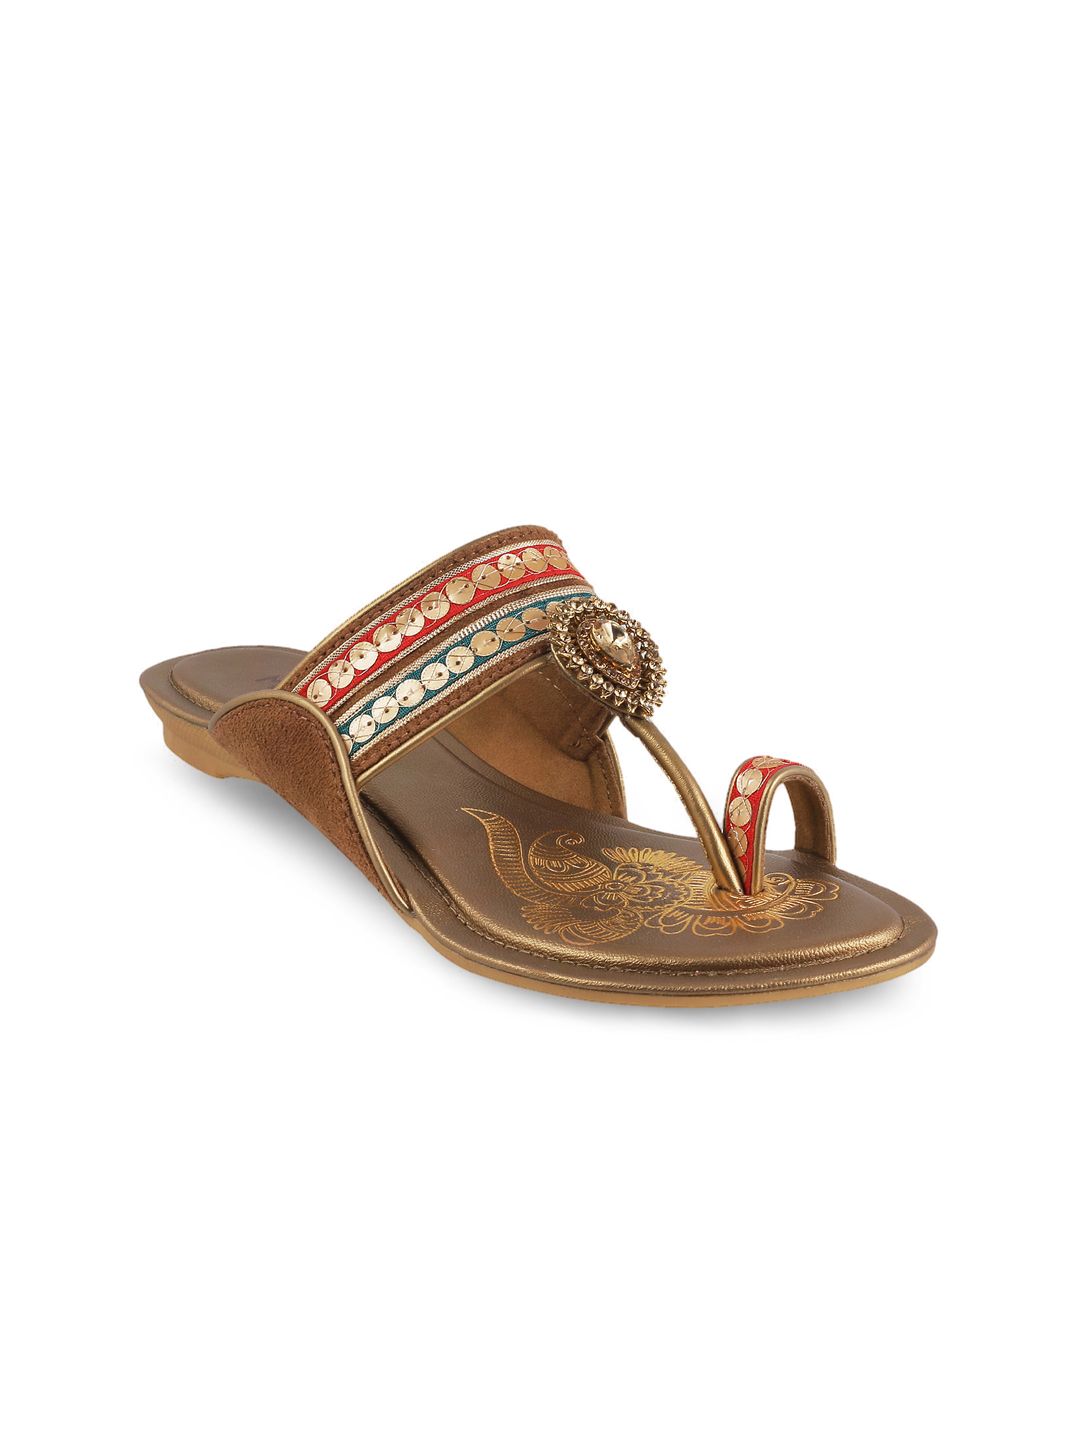 Metro Women Copper-Toned Embellished Flats Price in India